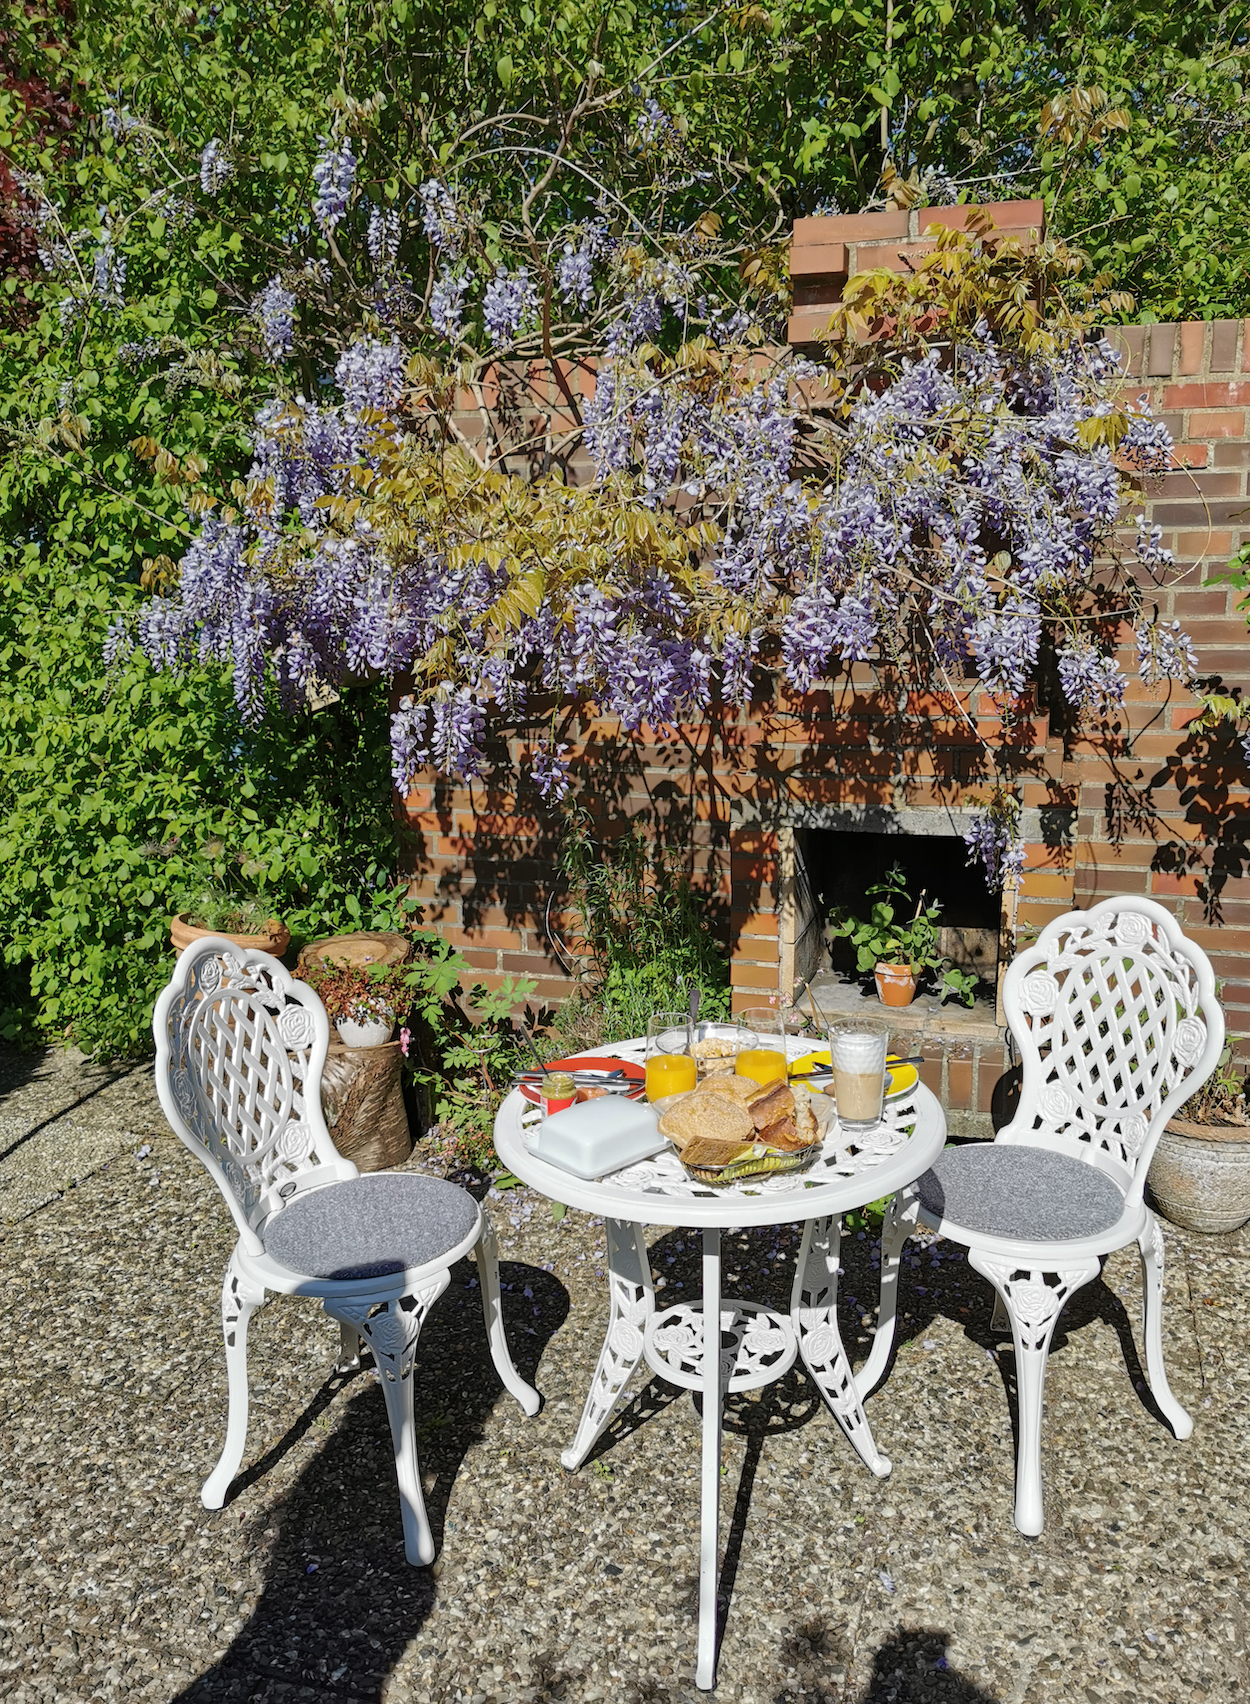 How to enjoy a meal on your garden bistro set